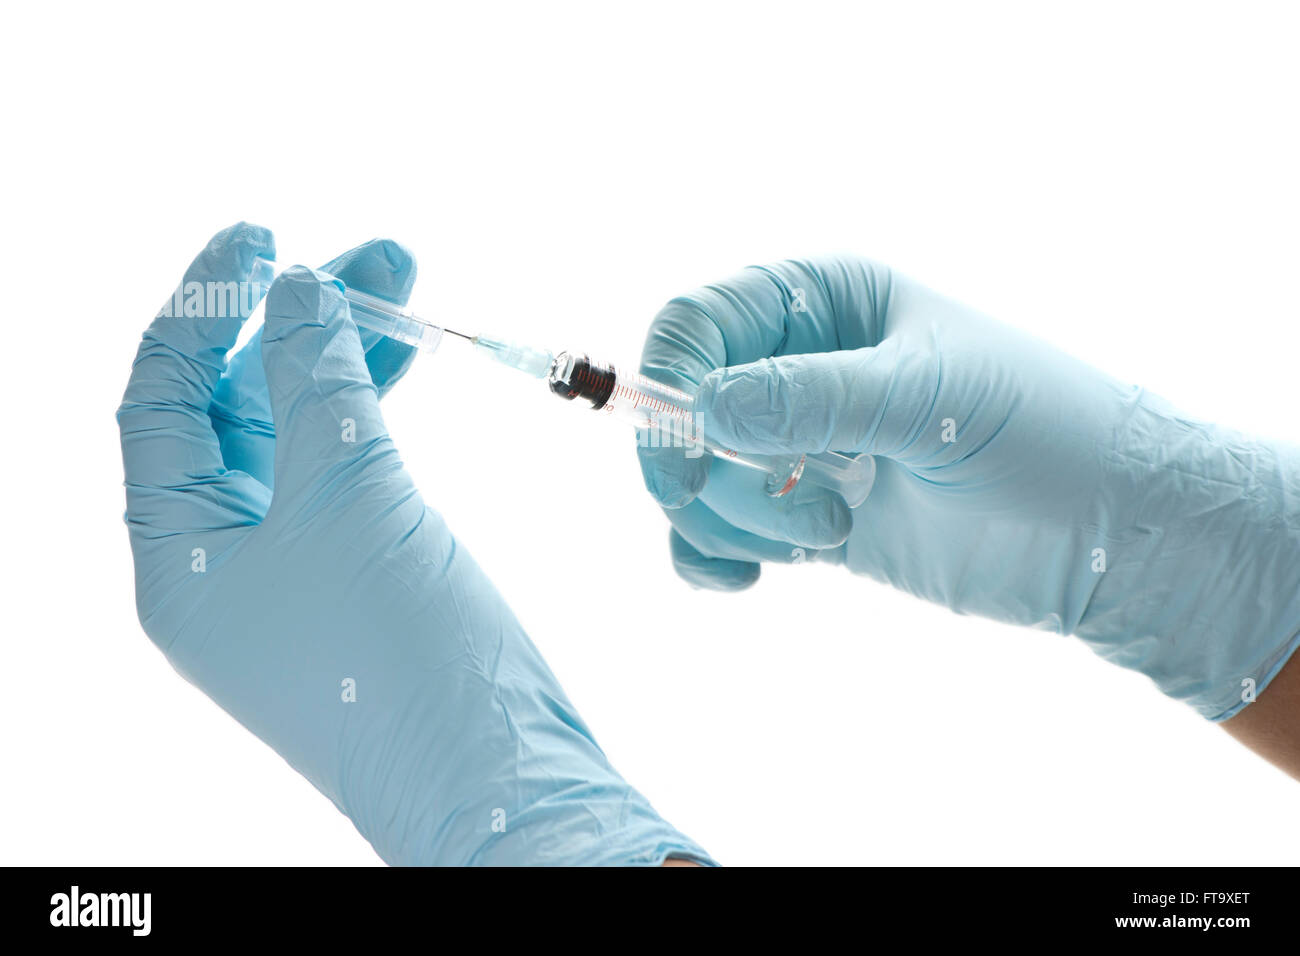 Nurse removes cap from syringe to prepare it for use. Stock Photo